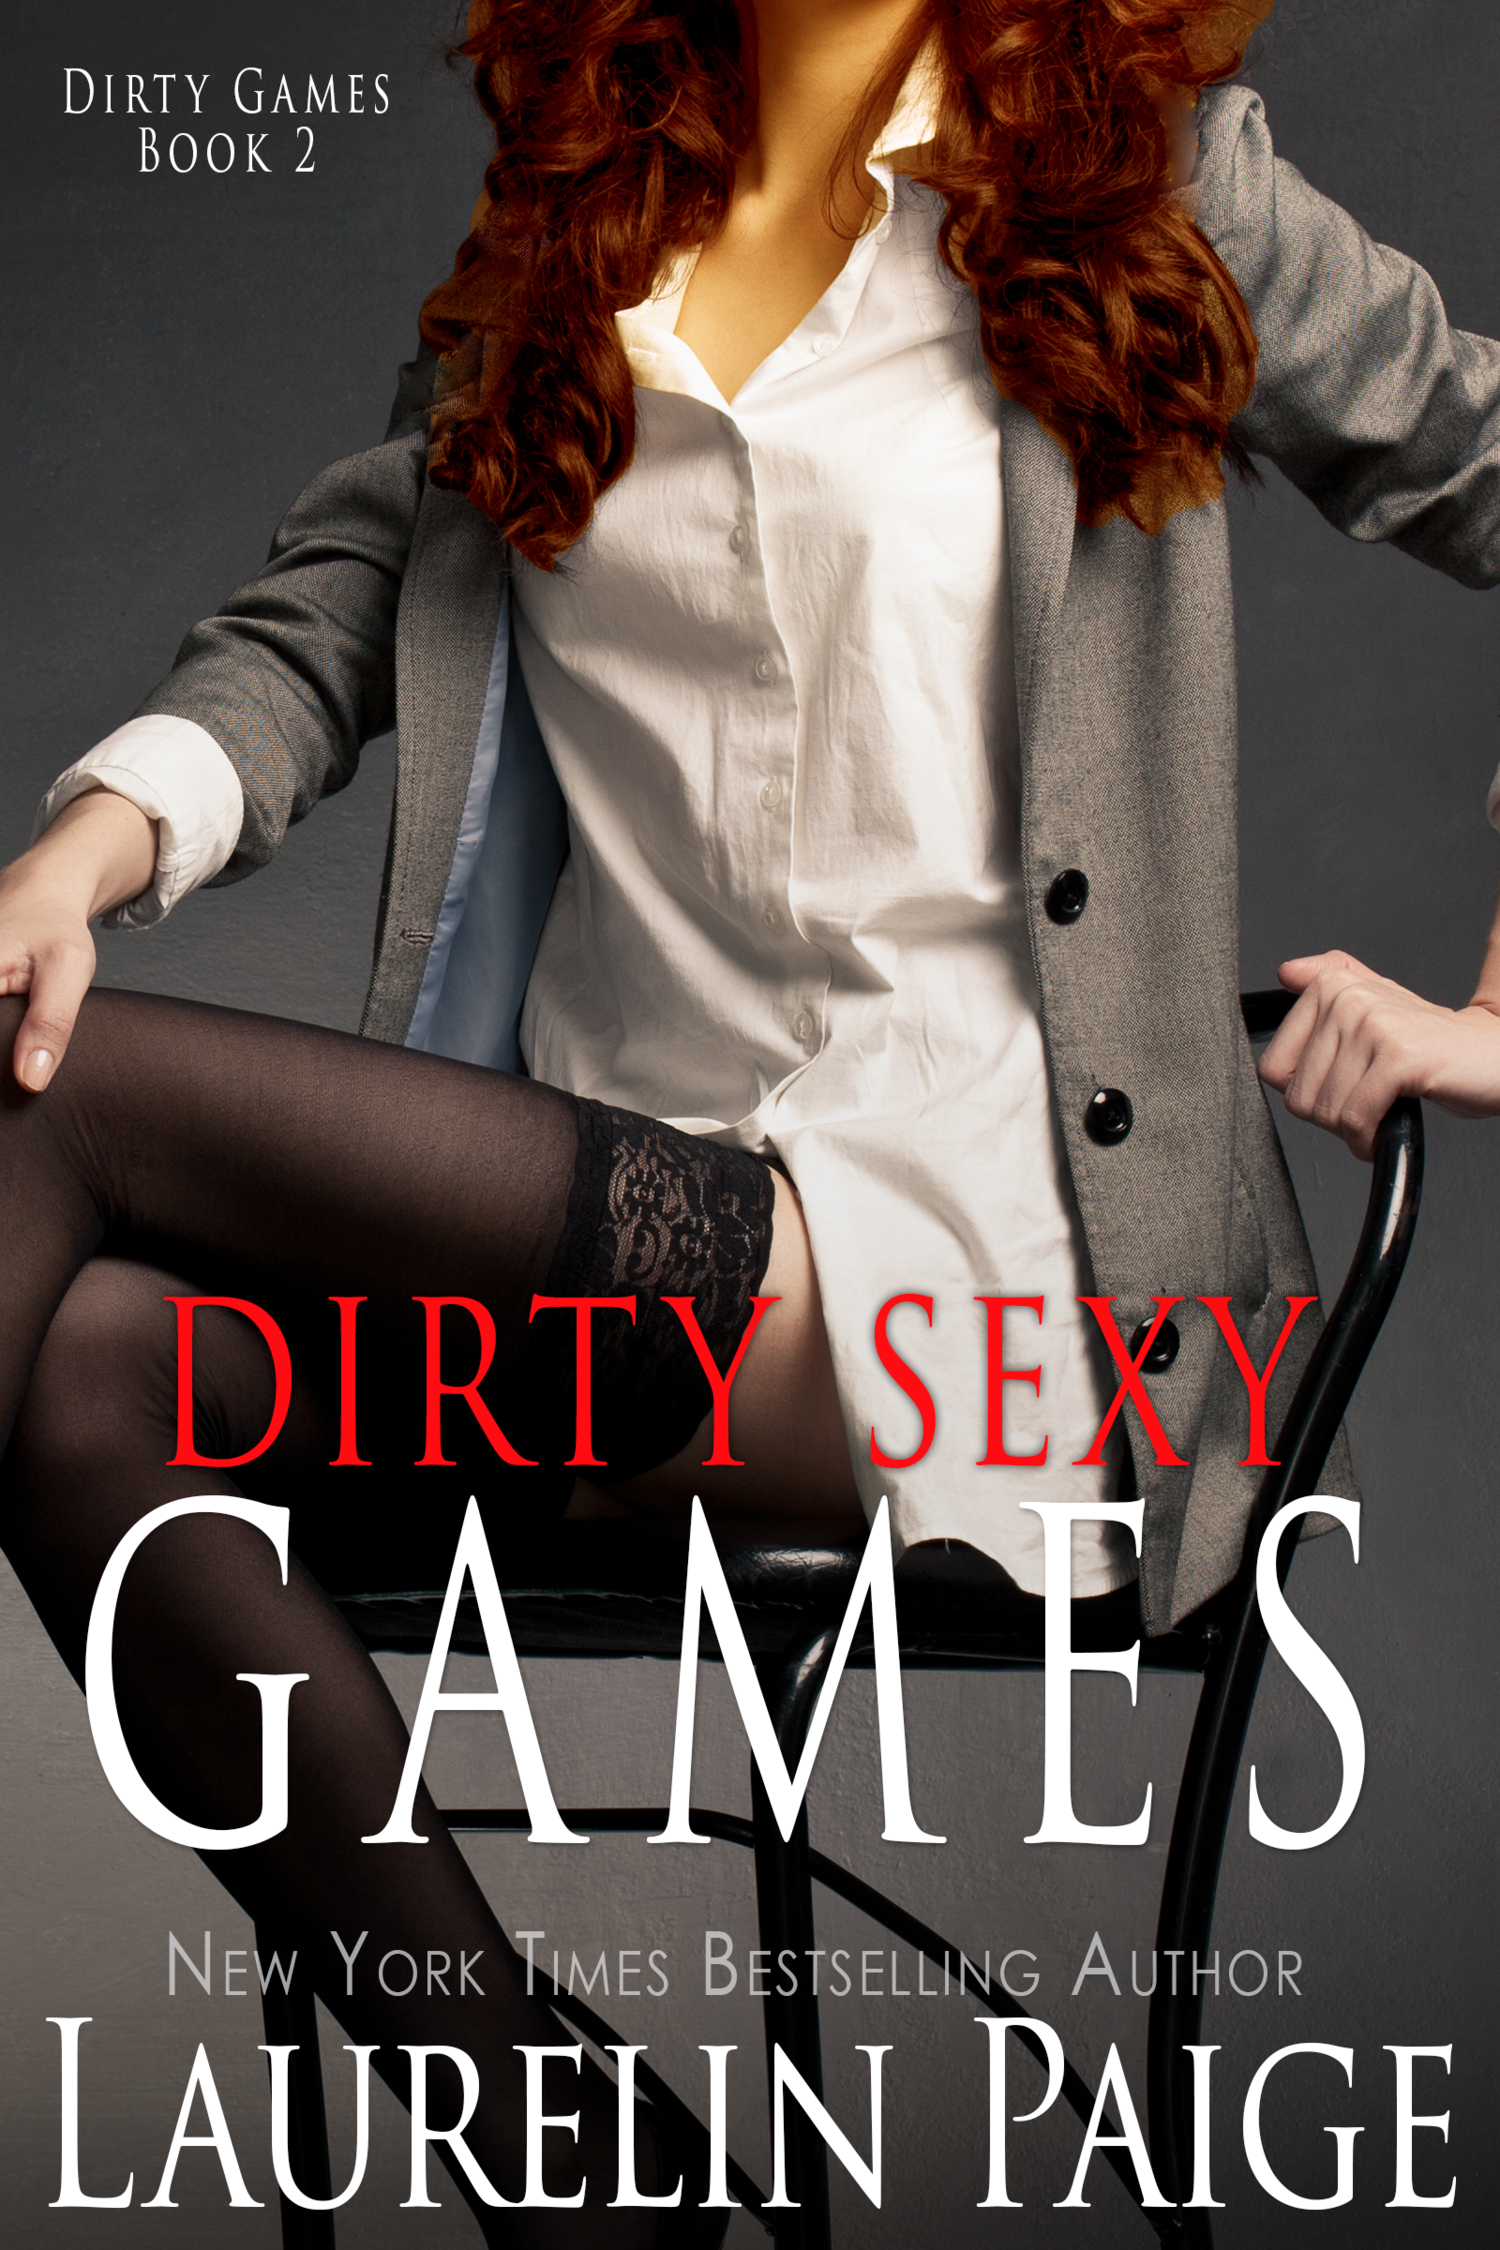 Dirty Sexy Games - Laurelin Paige.